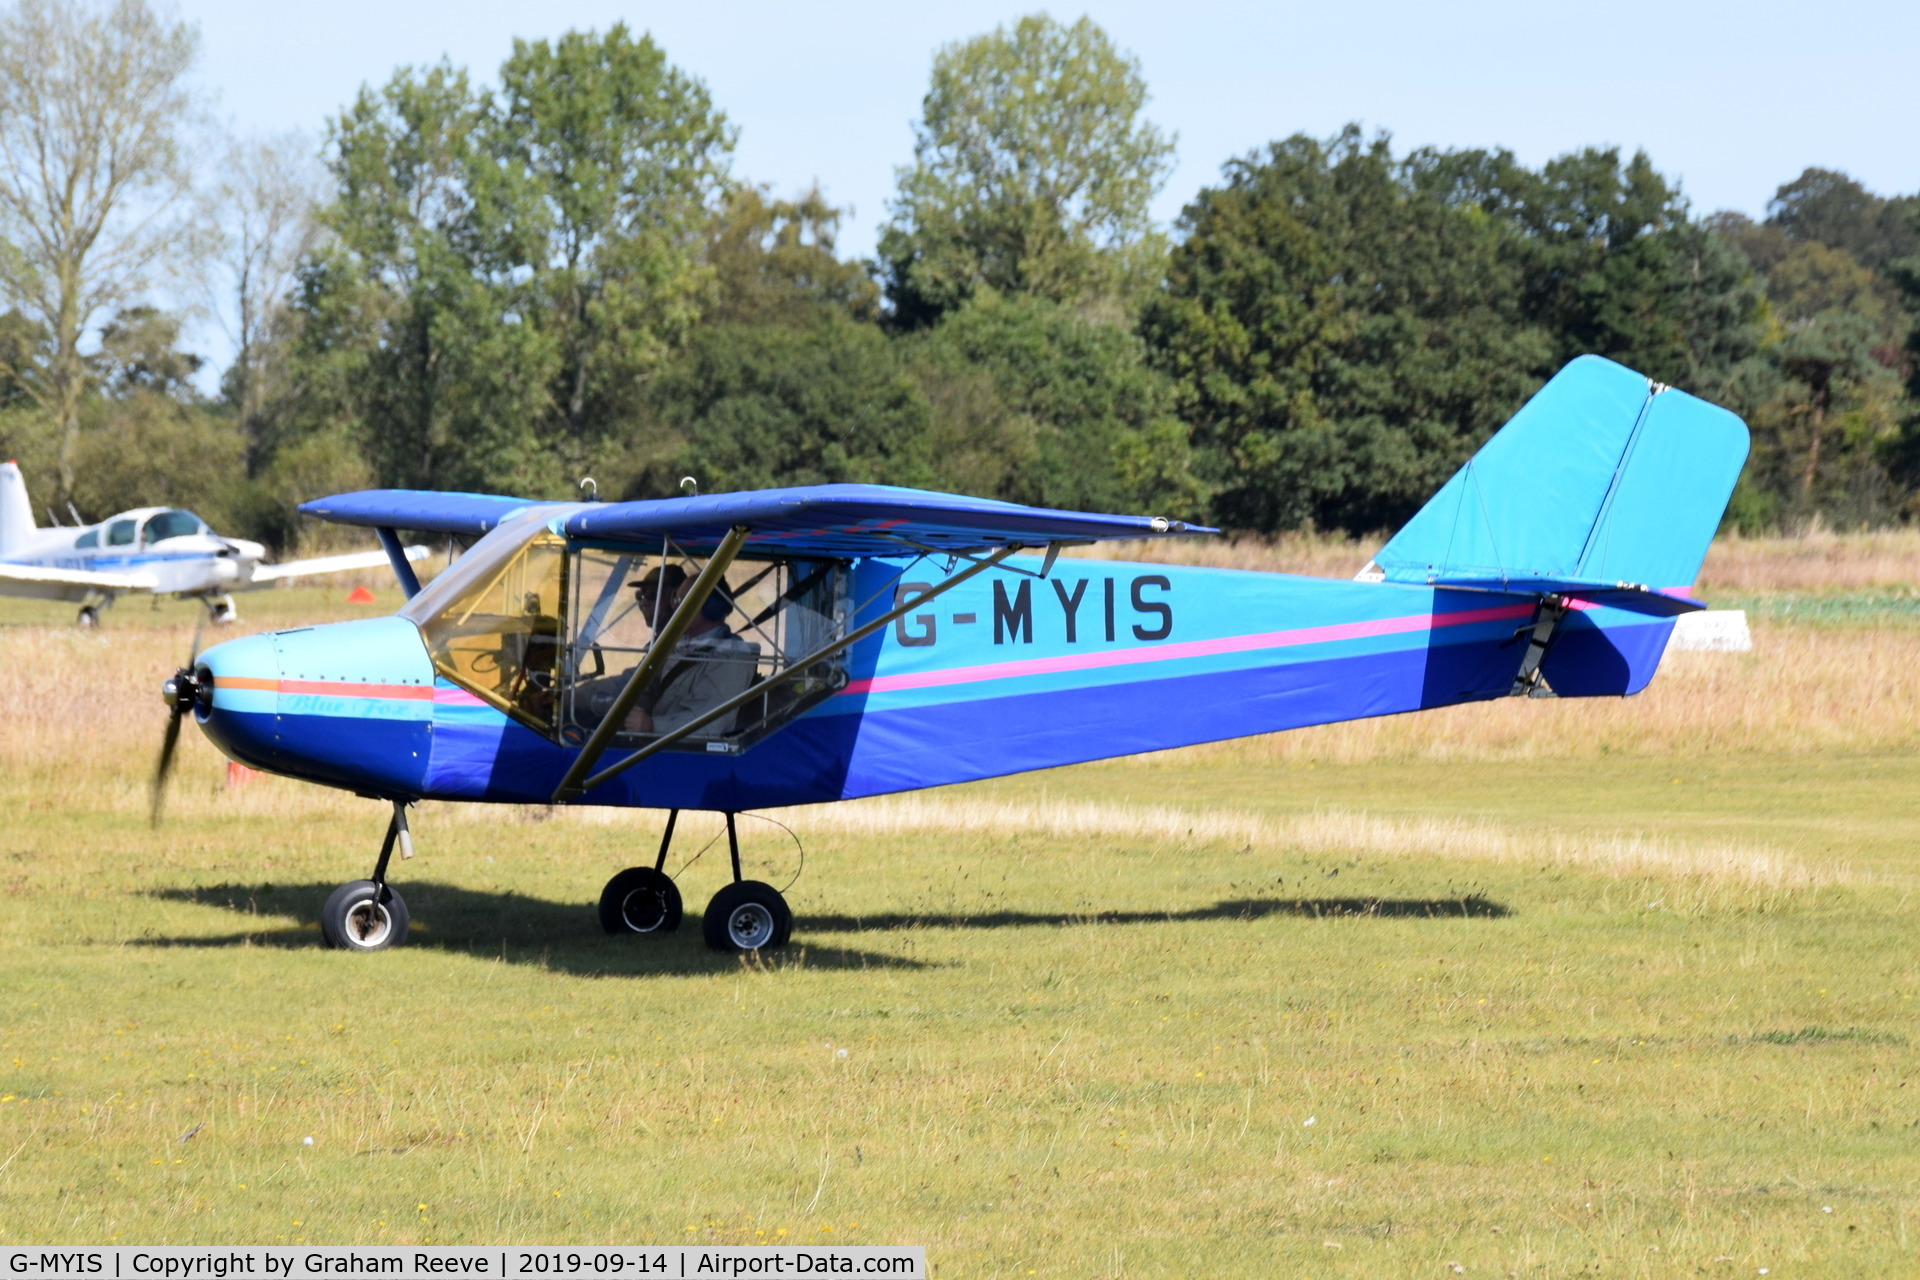 G-MYIS, 1993 Rans S-6ESD Coyote II C/N PFA 204-12382, Just landed at, Bury St Edmunds, Rougham Airfield, UK.